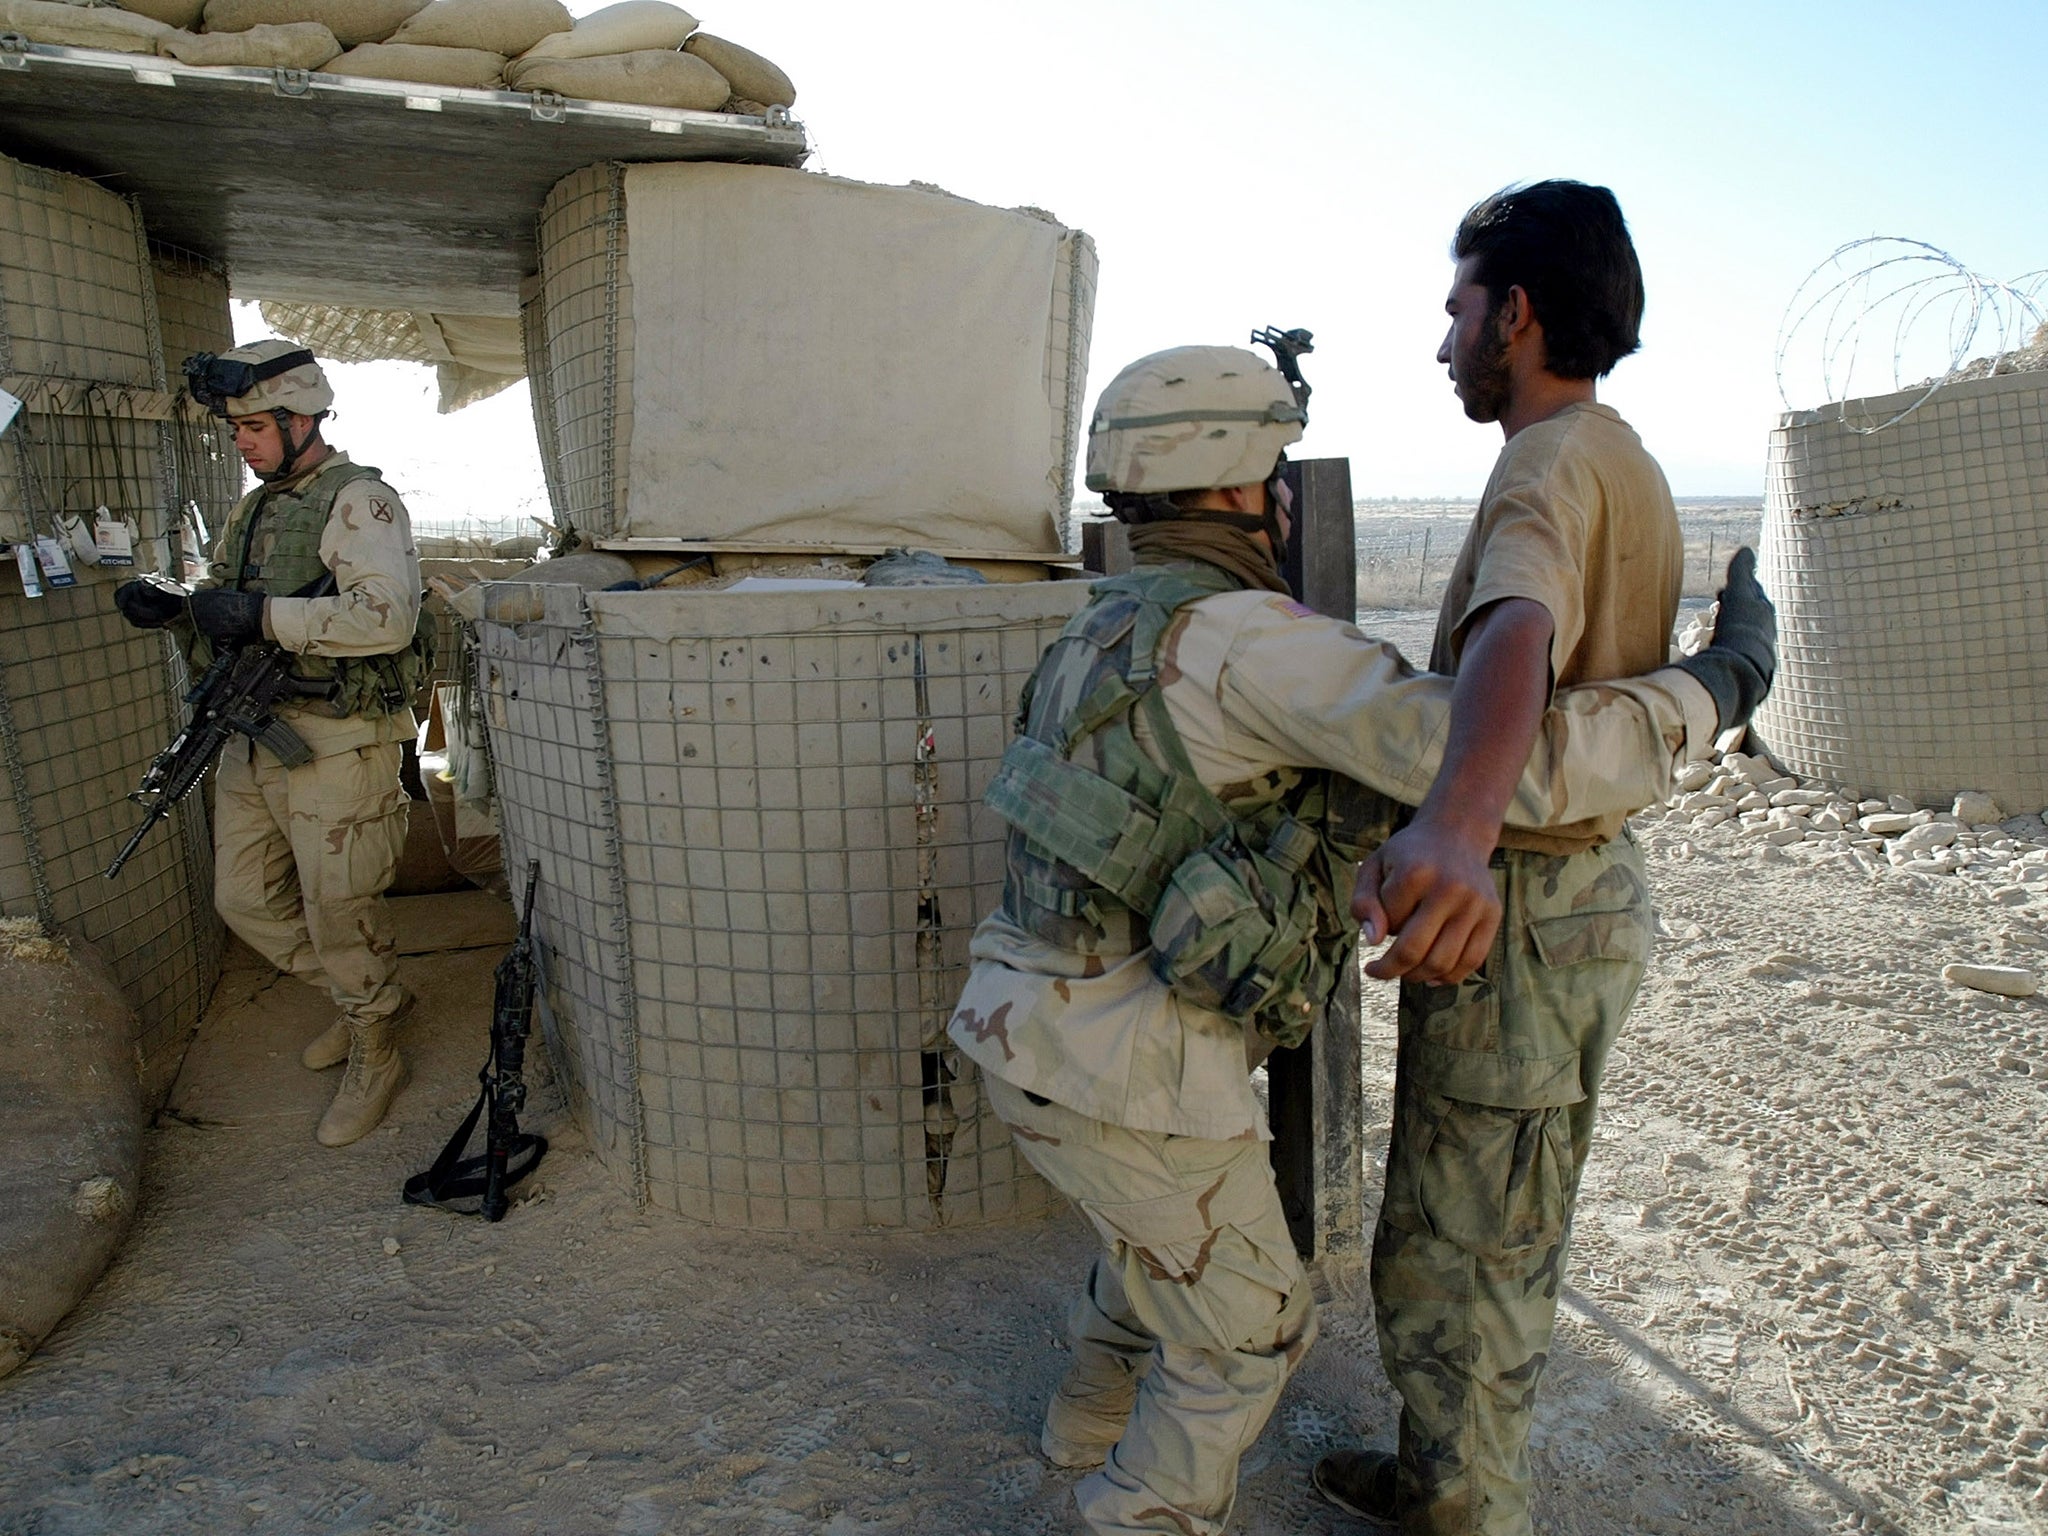 An Afghan day-labourer is frisked at the firebase entrance.